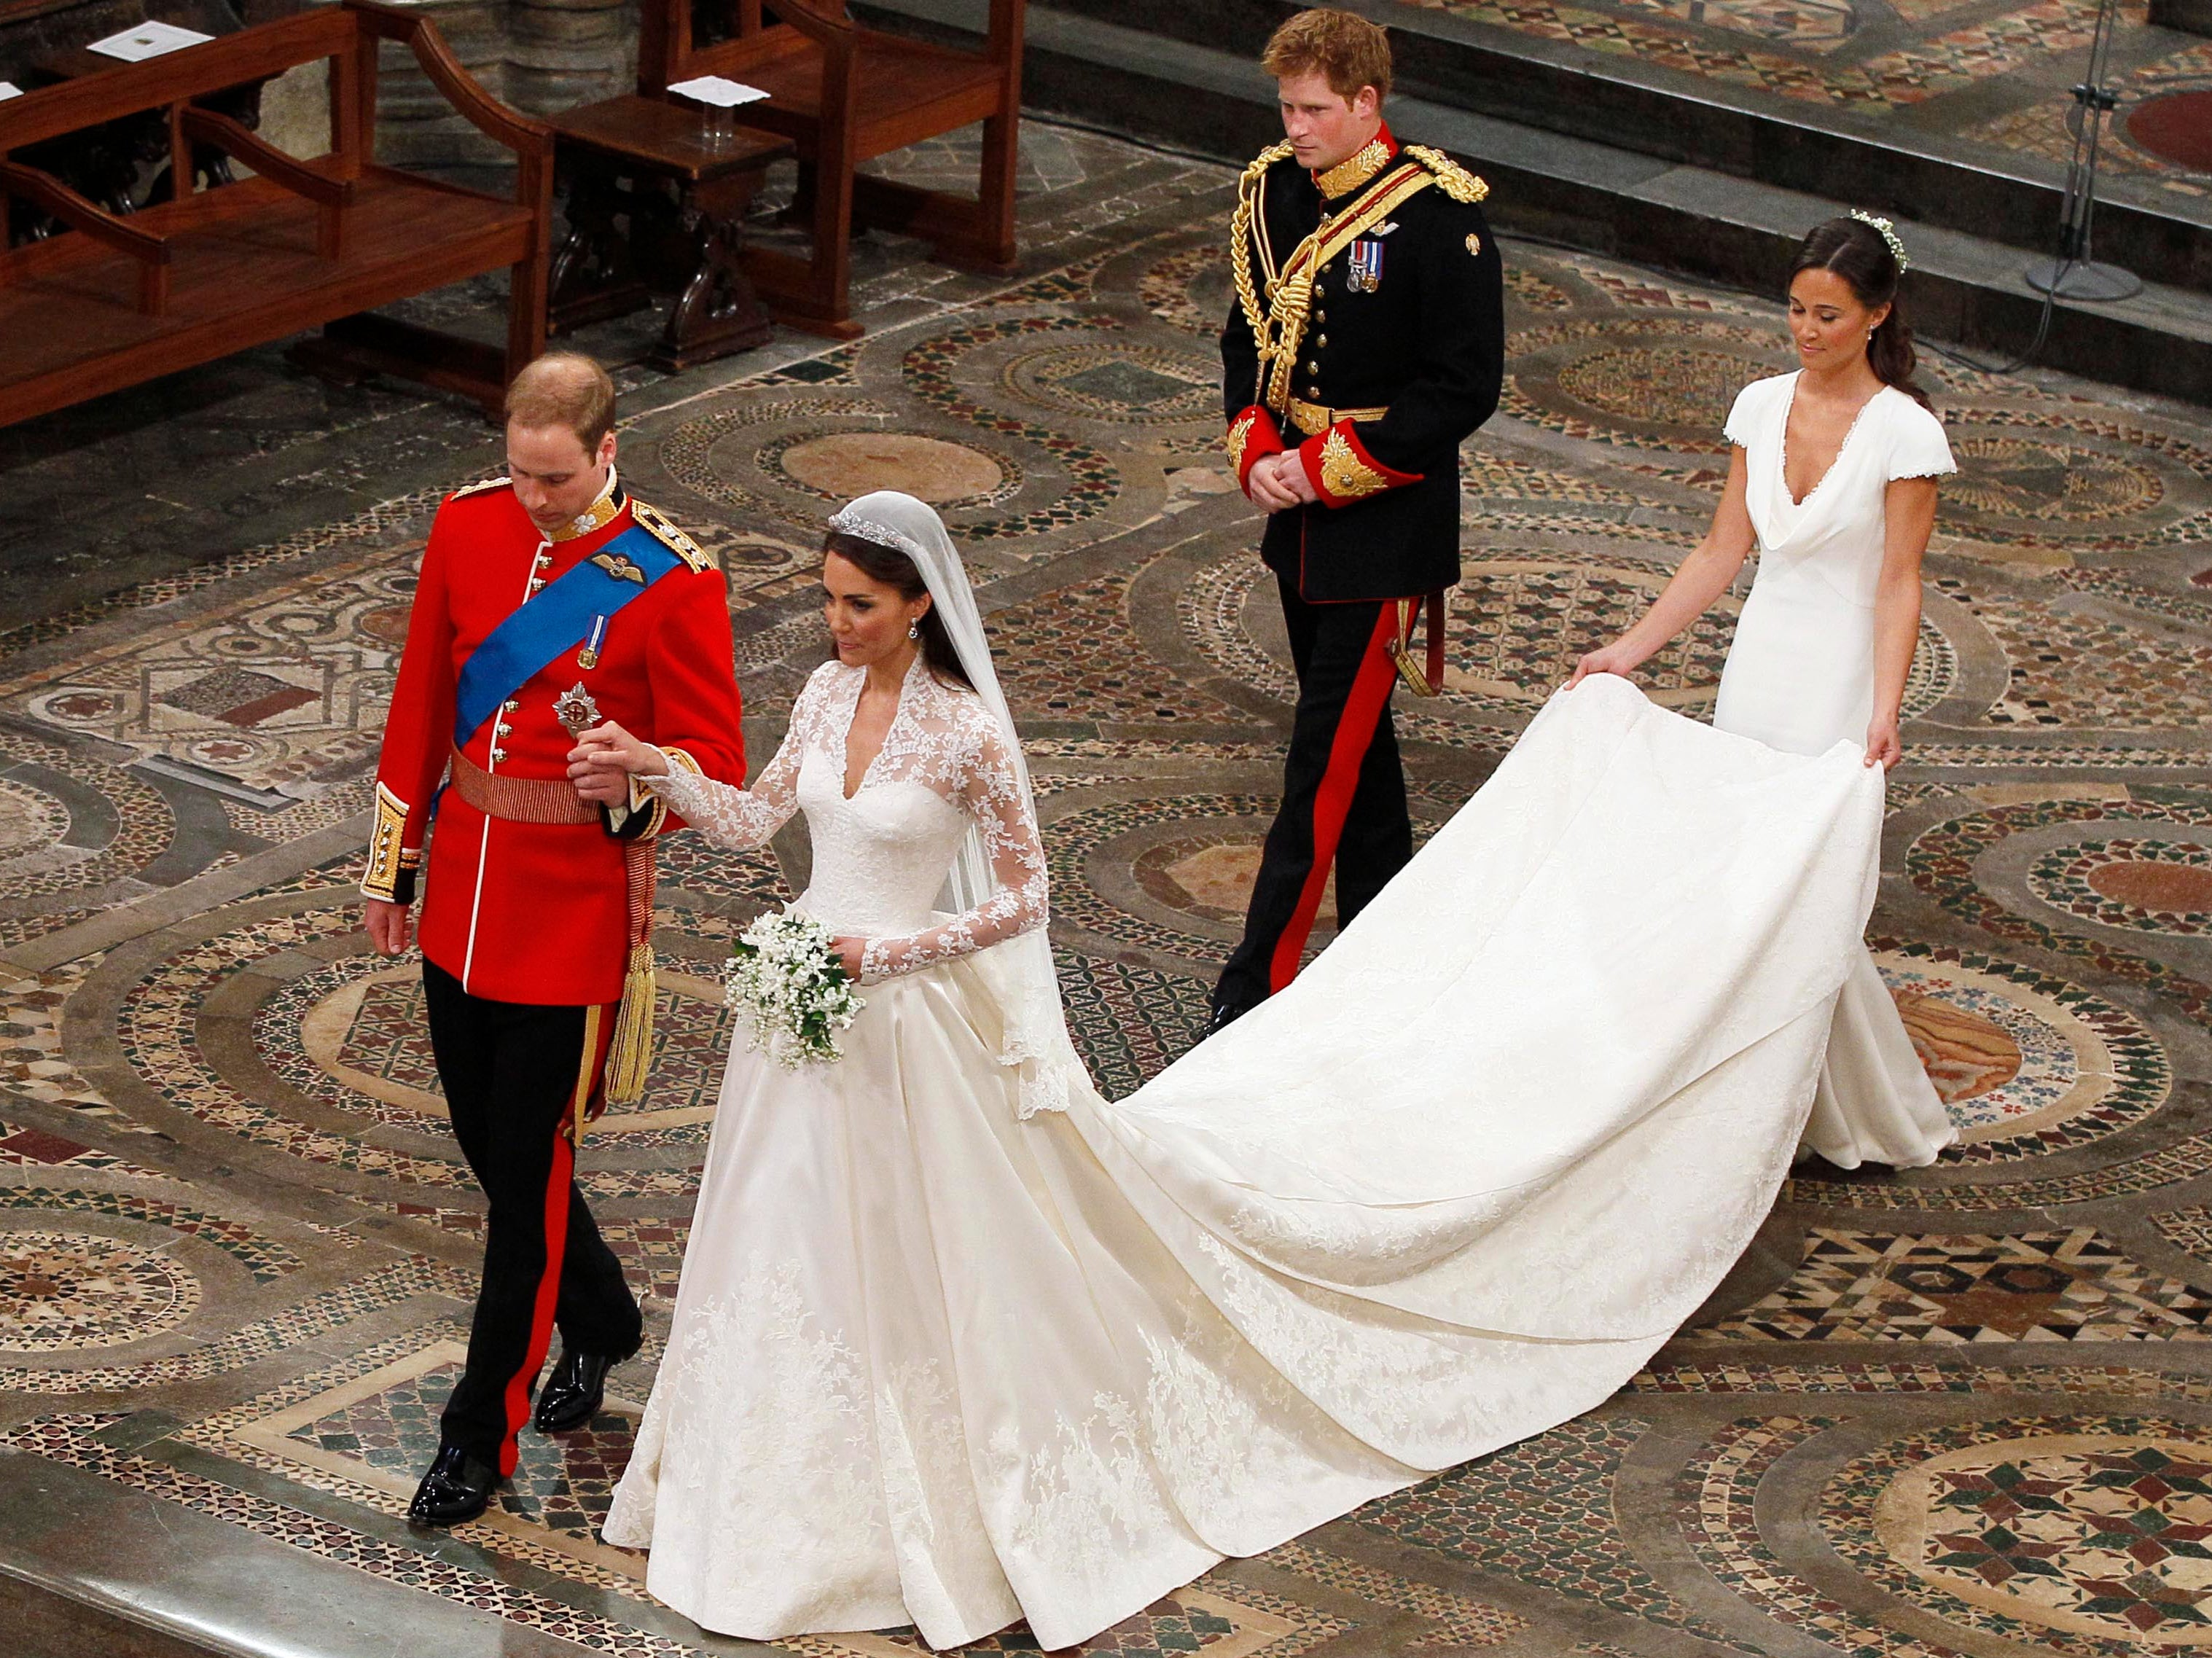 The Windsors walking down the aisle in 2011